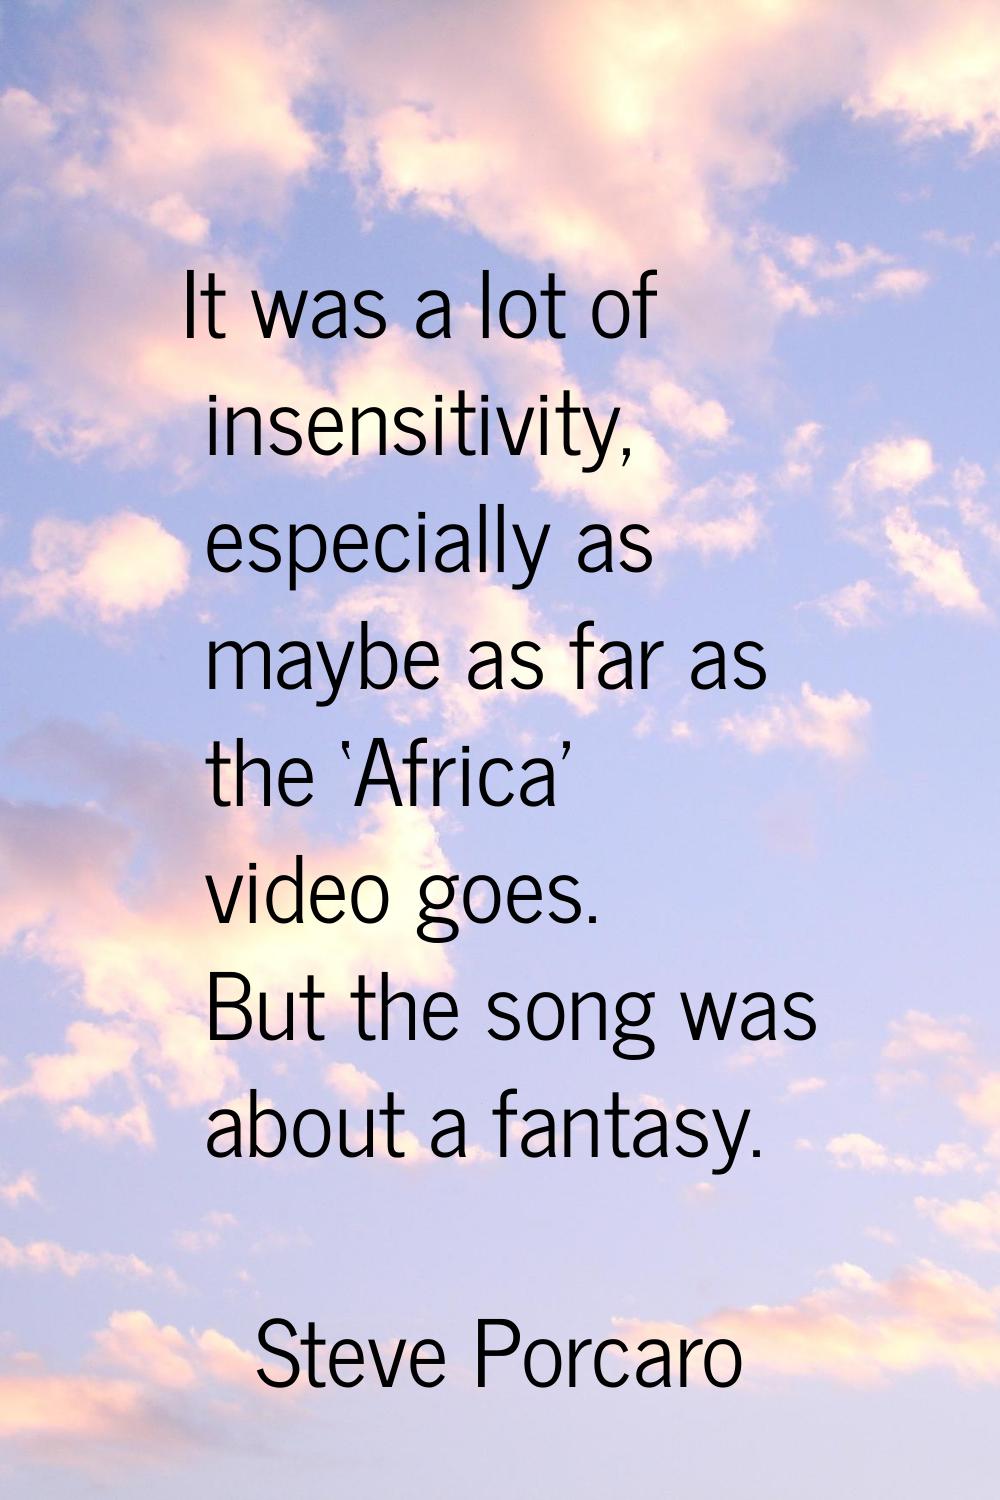 It was a lot of insensitivity, especially as maybe as far as the ‘Africa' video goes. But the song 